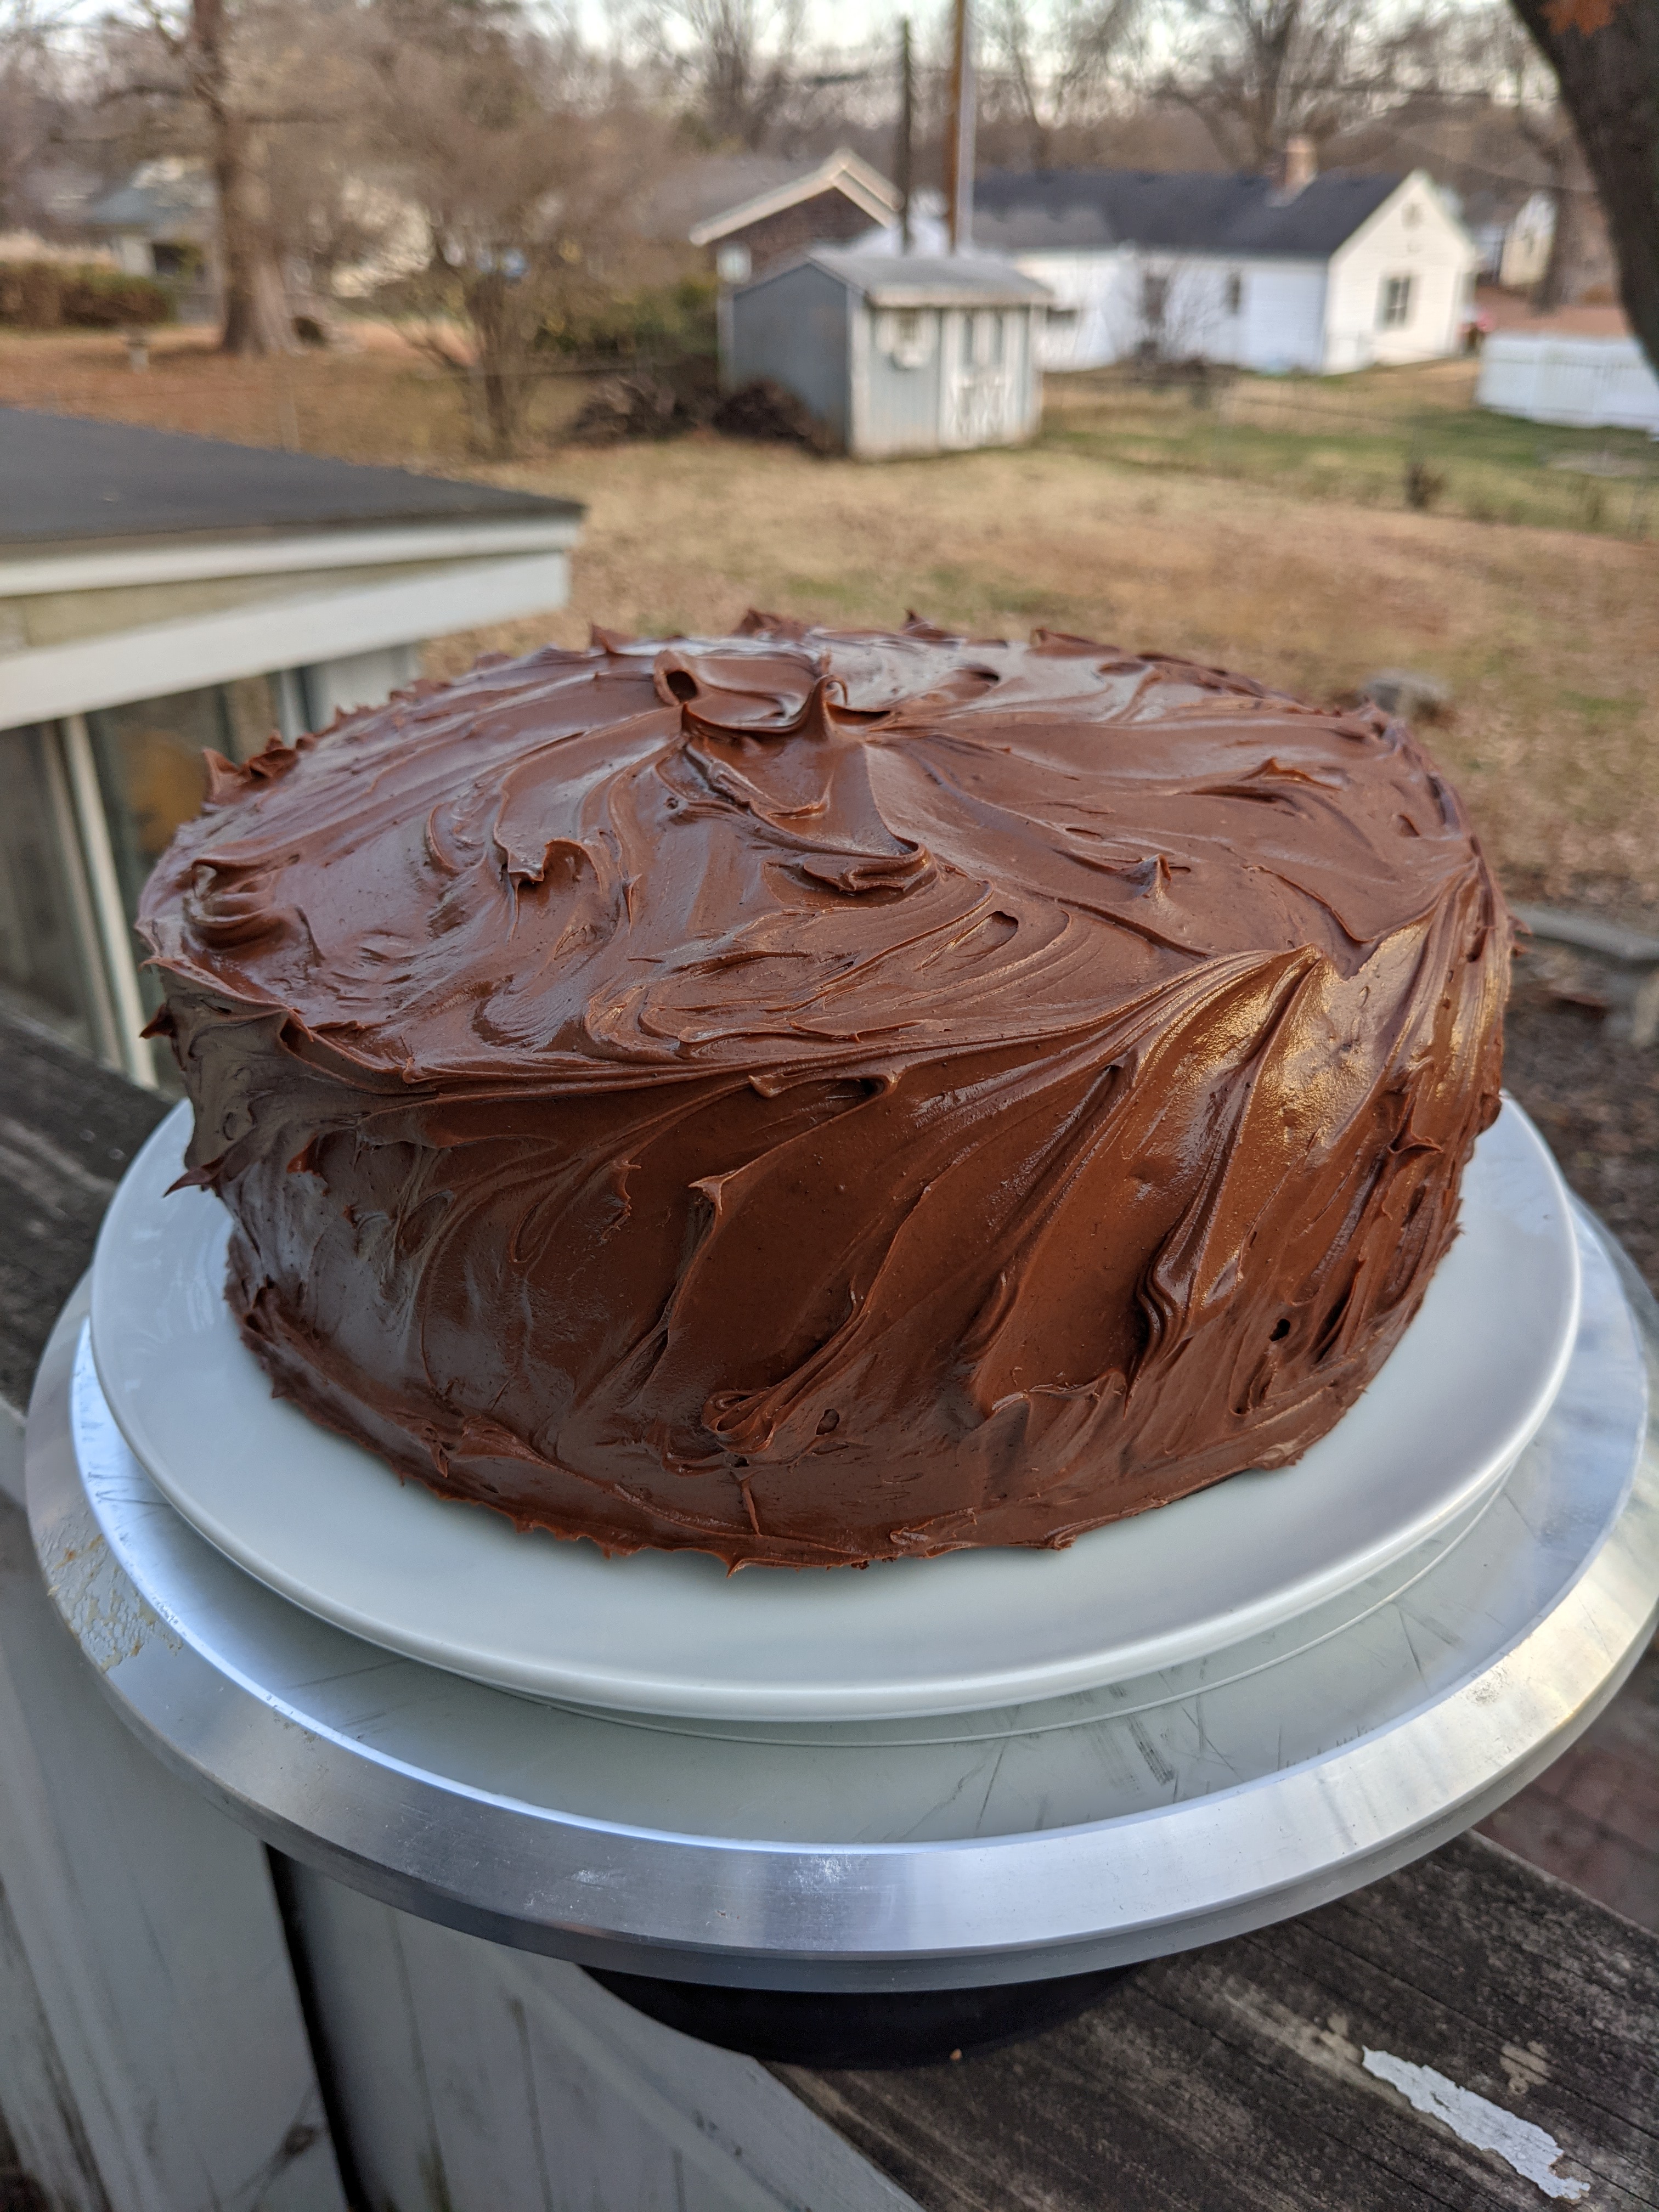 A chocolate cake covered with dollops of chocolate frosting